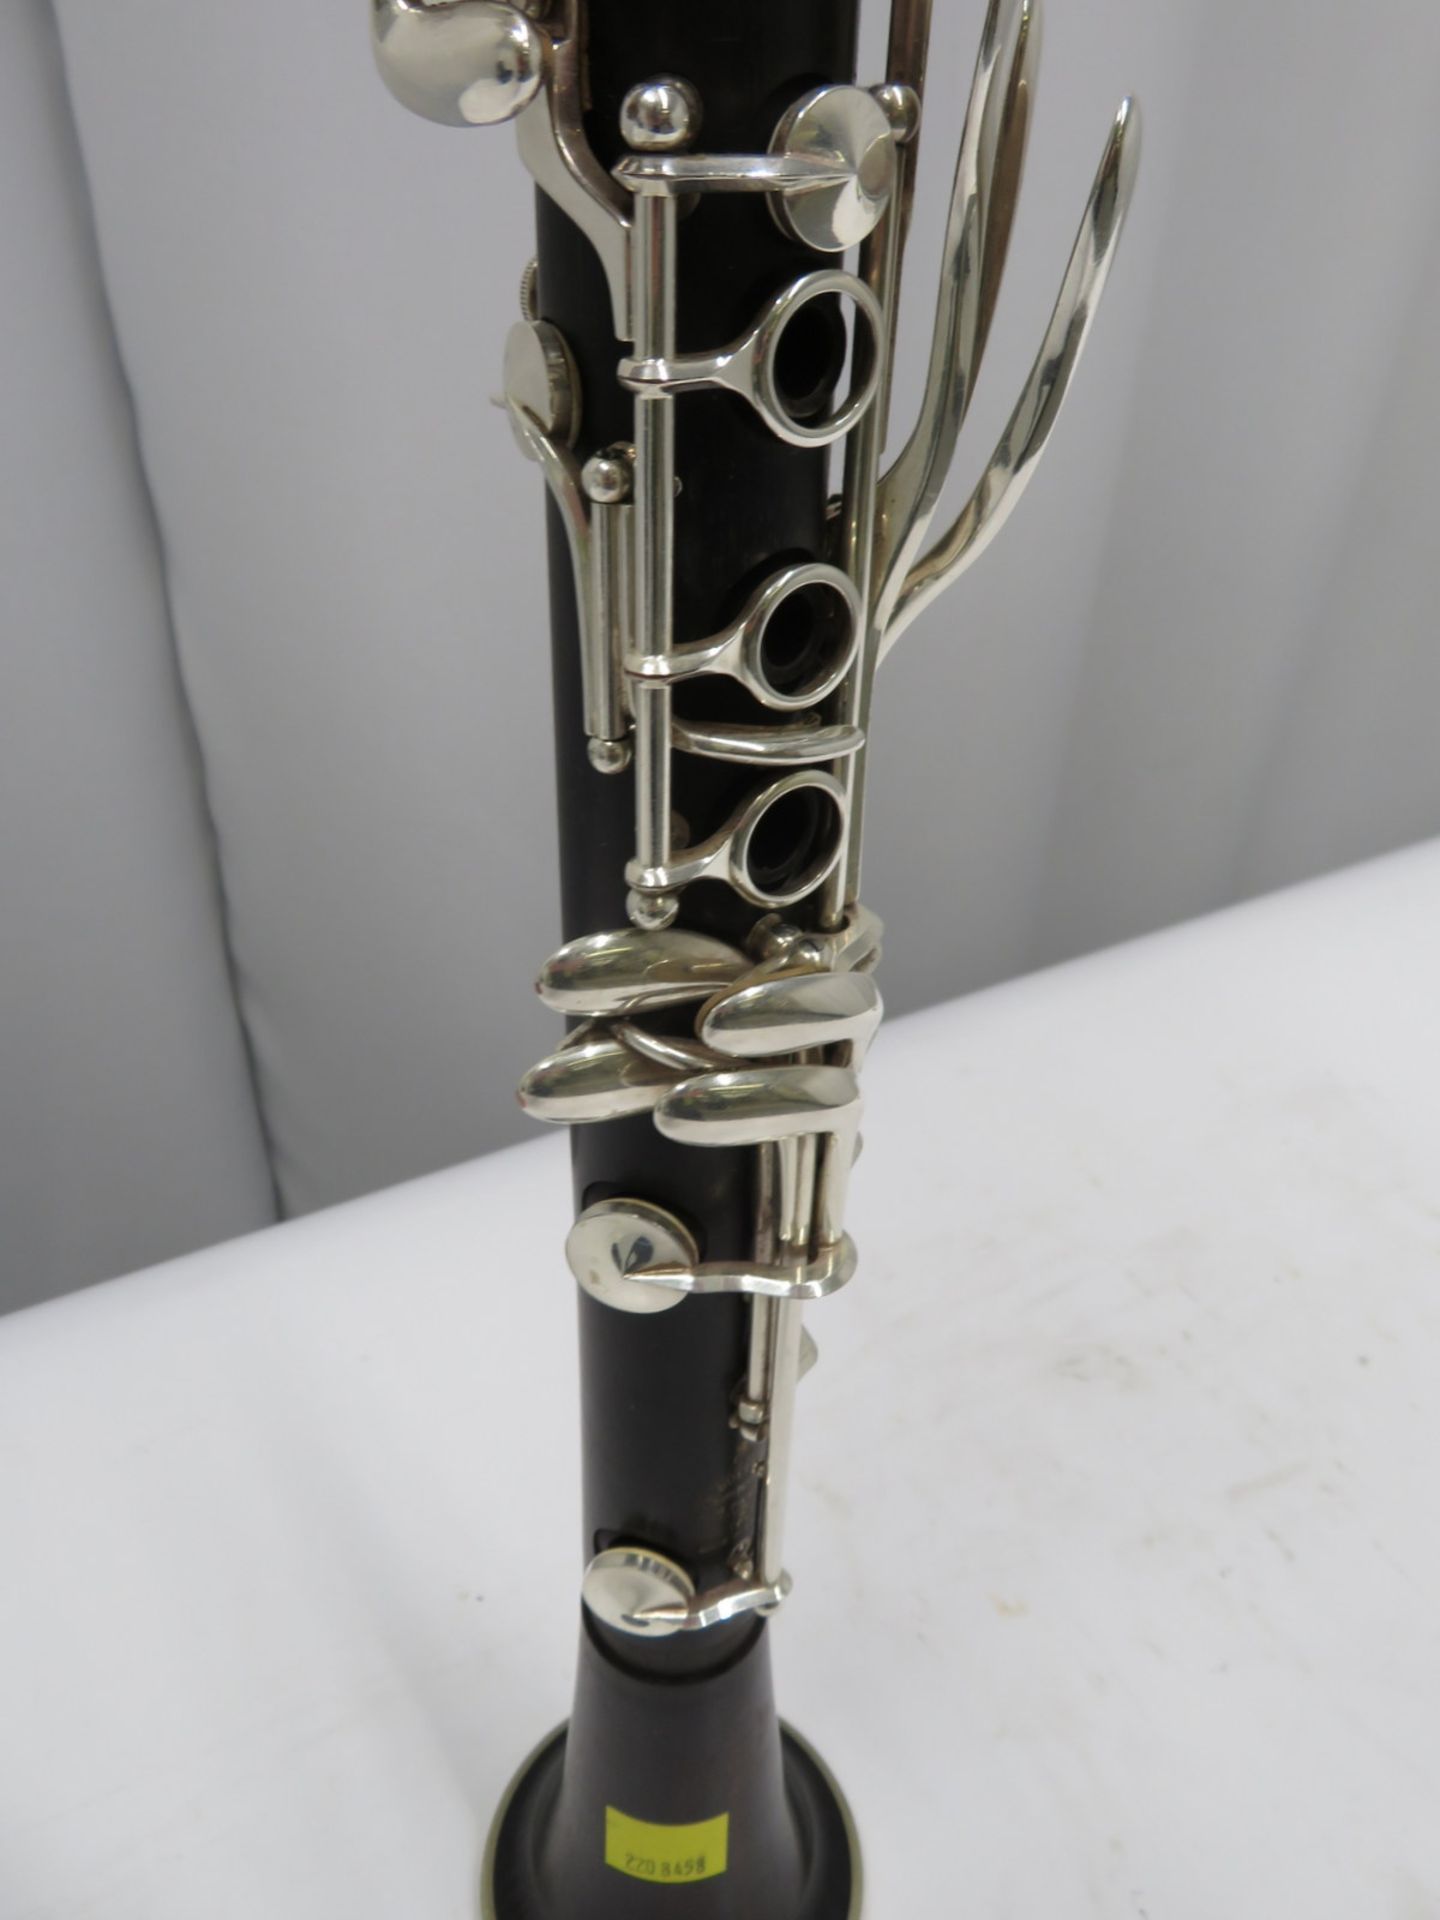 Buffet Crampon R13 Prestige clarinet with case. Serial number: 587000. - Image 8 of 20